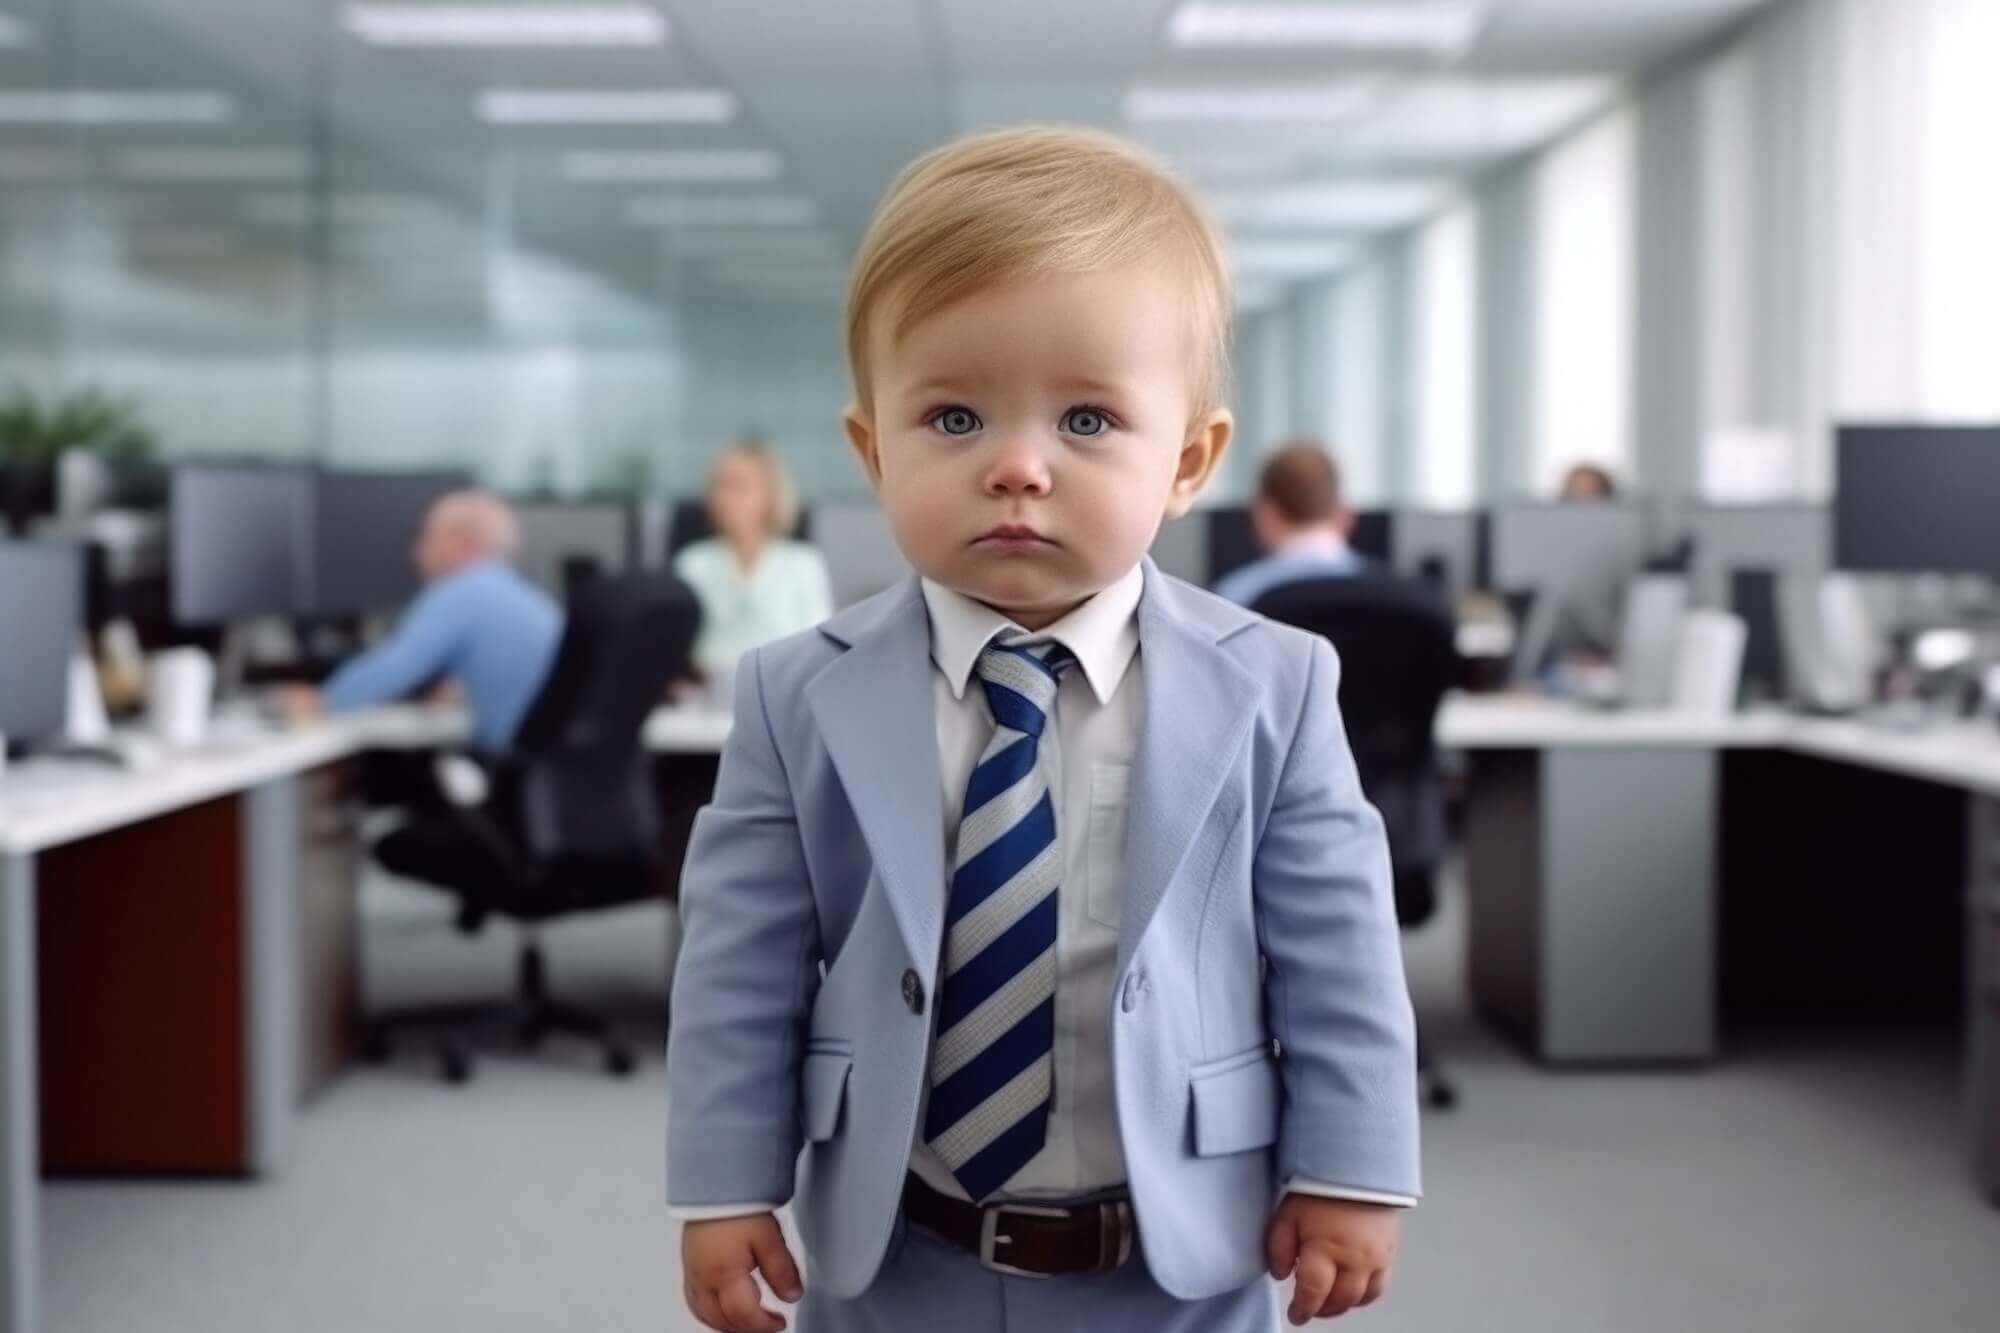 Does CEO age really matter? Image of a toddler in a suit.